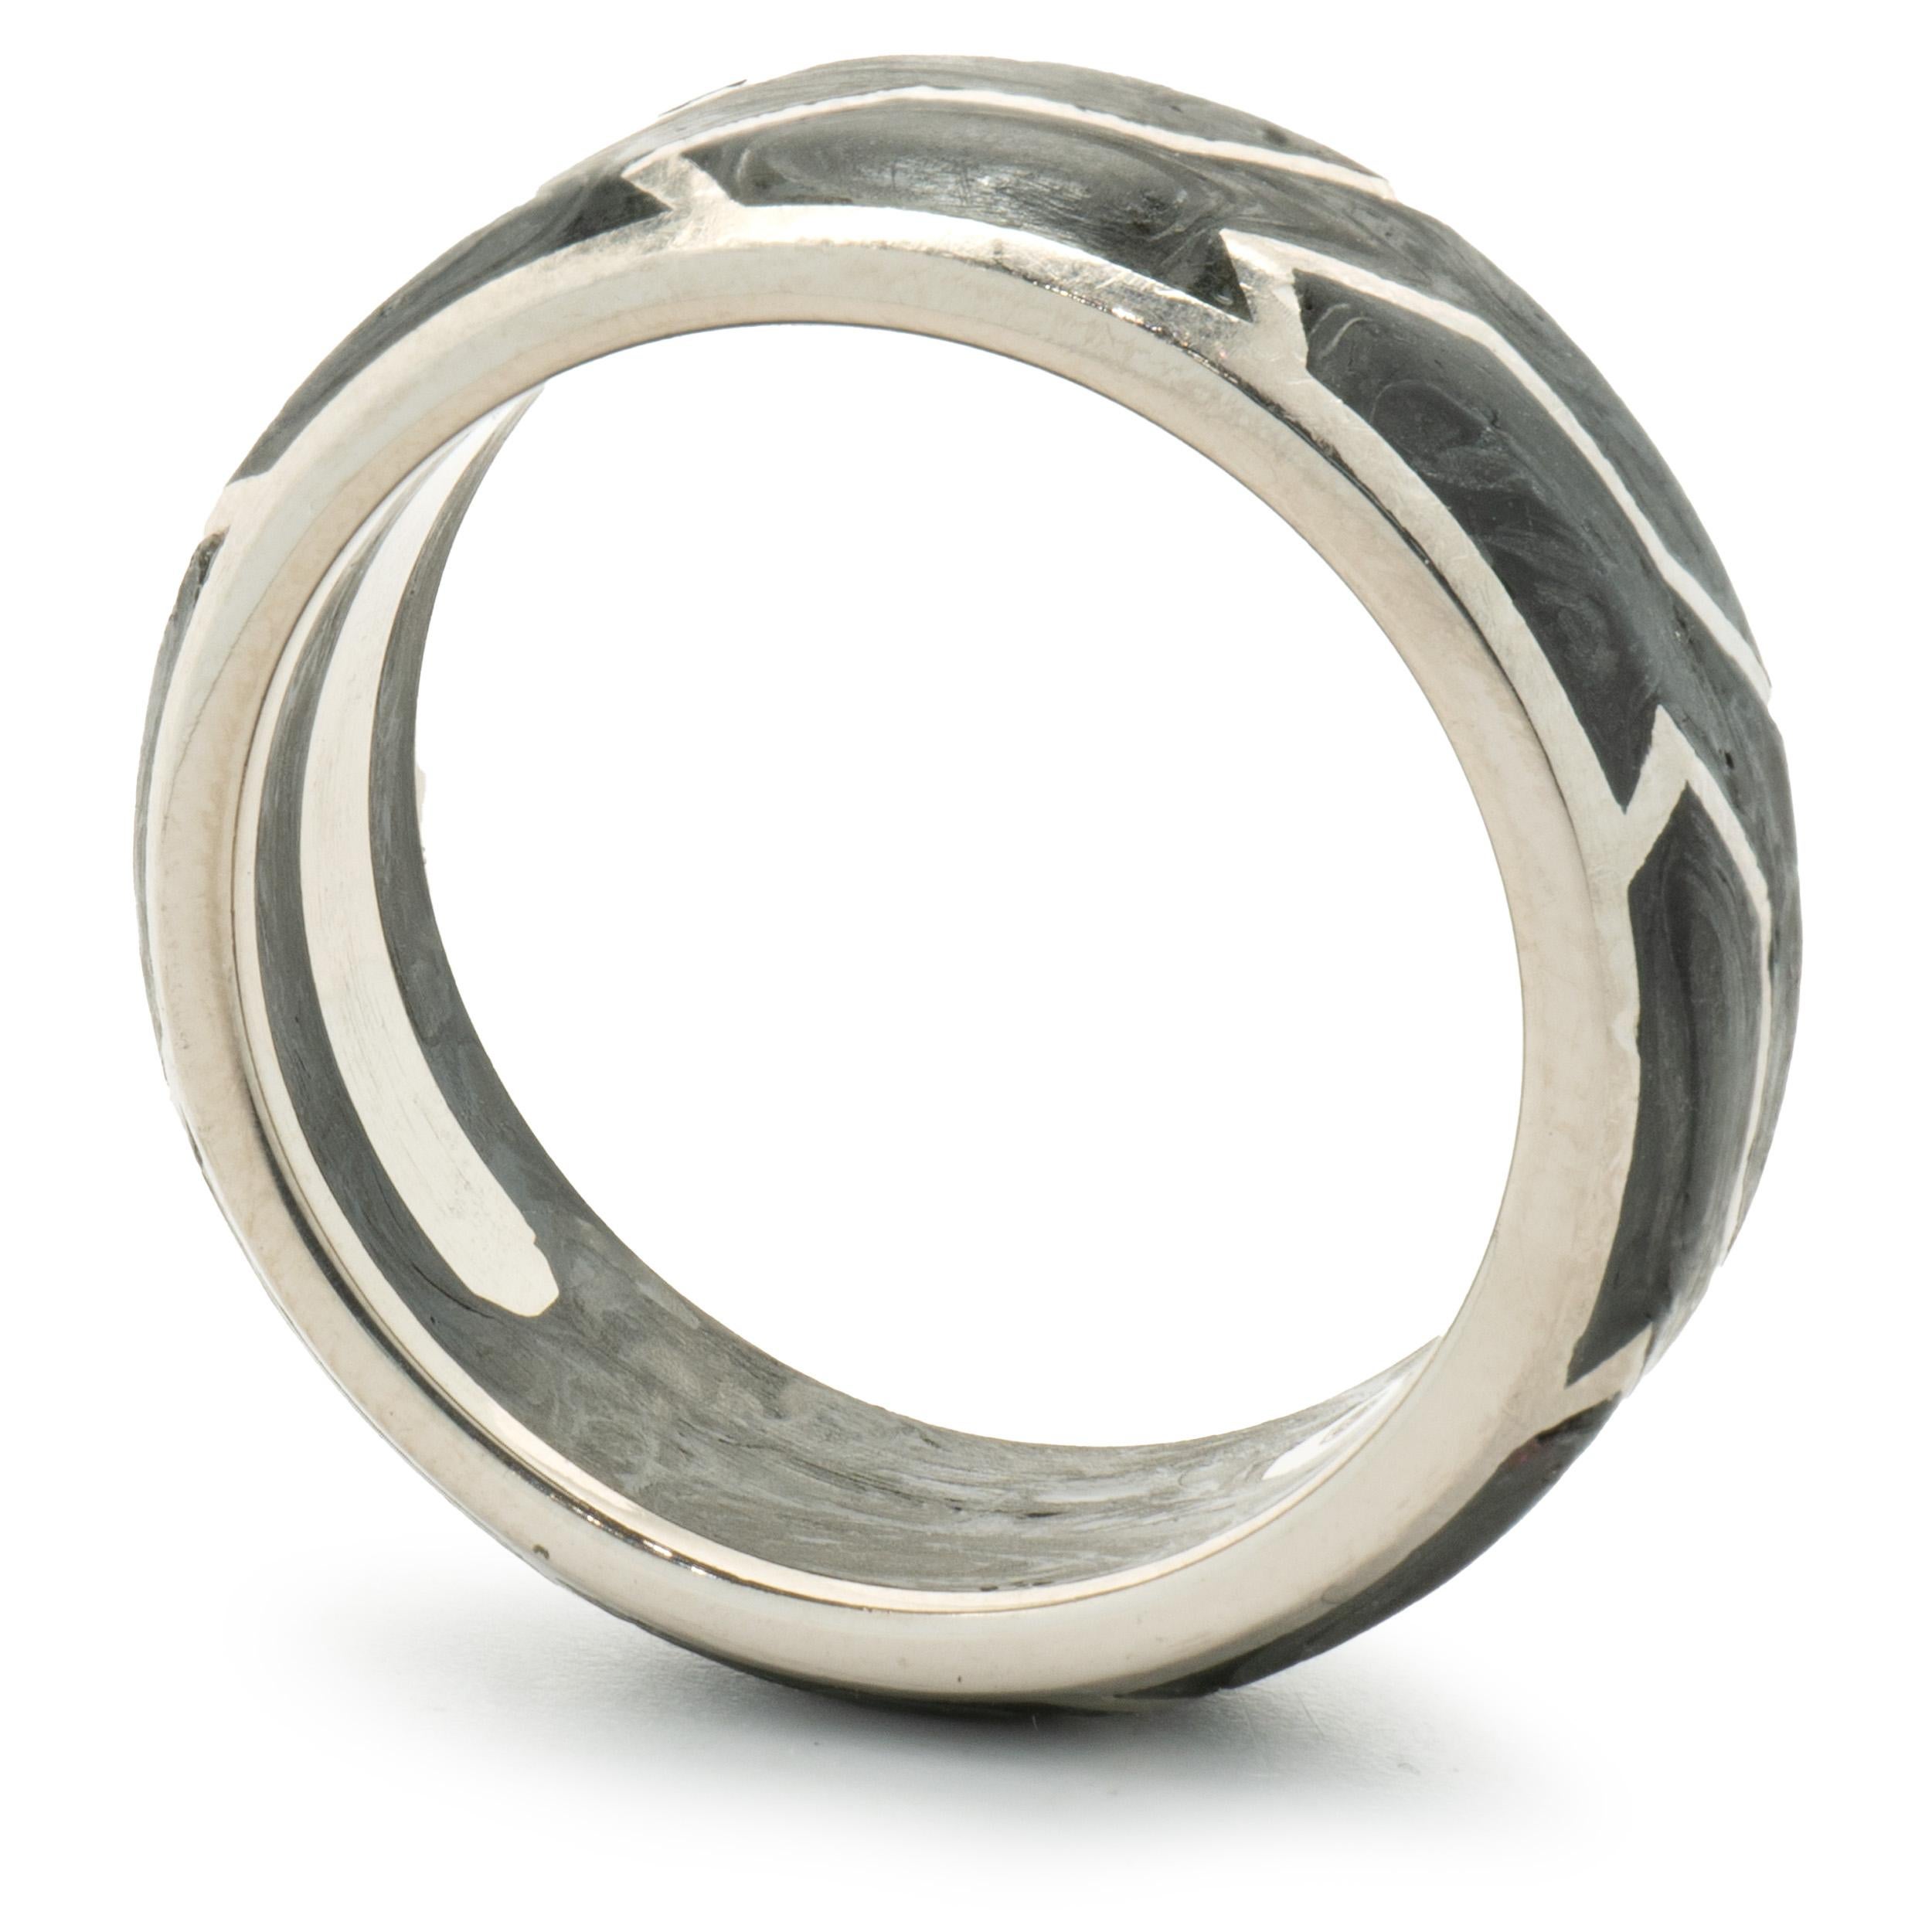 David Yurman 18 Karat White Gold Forged Carbon 8MM Band In Excellent Condition For Sale In Scottsdale, AZ